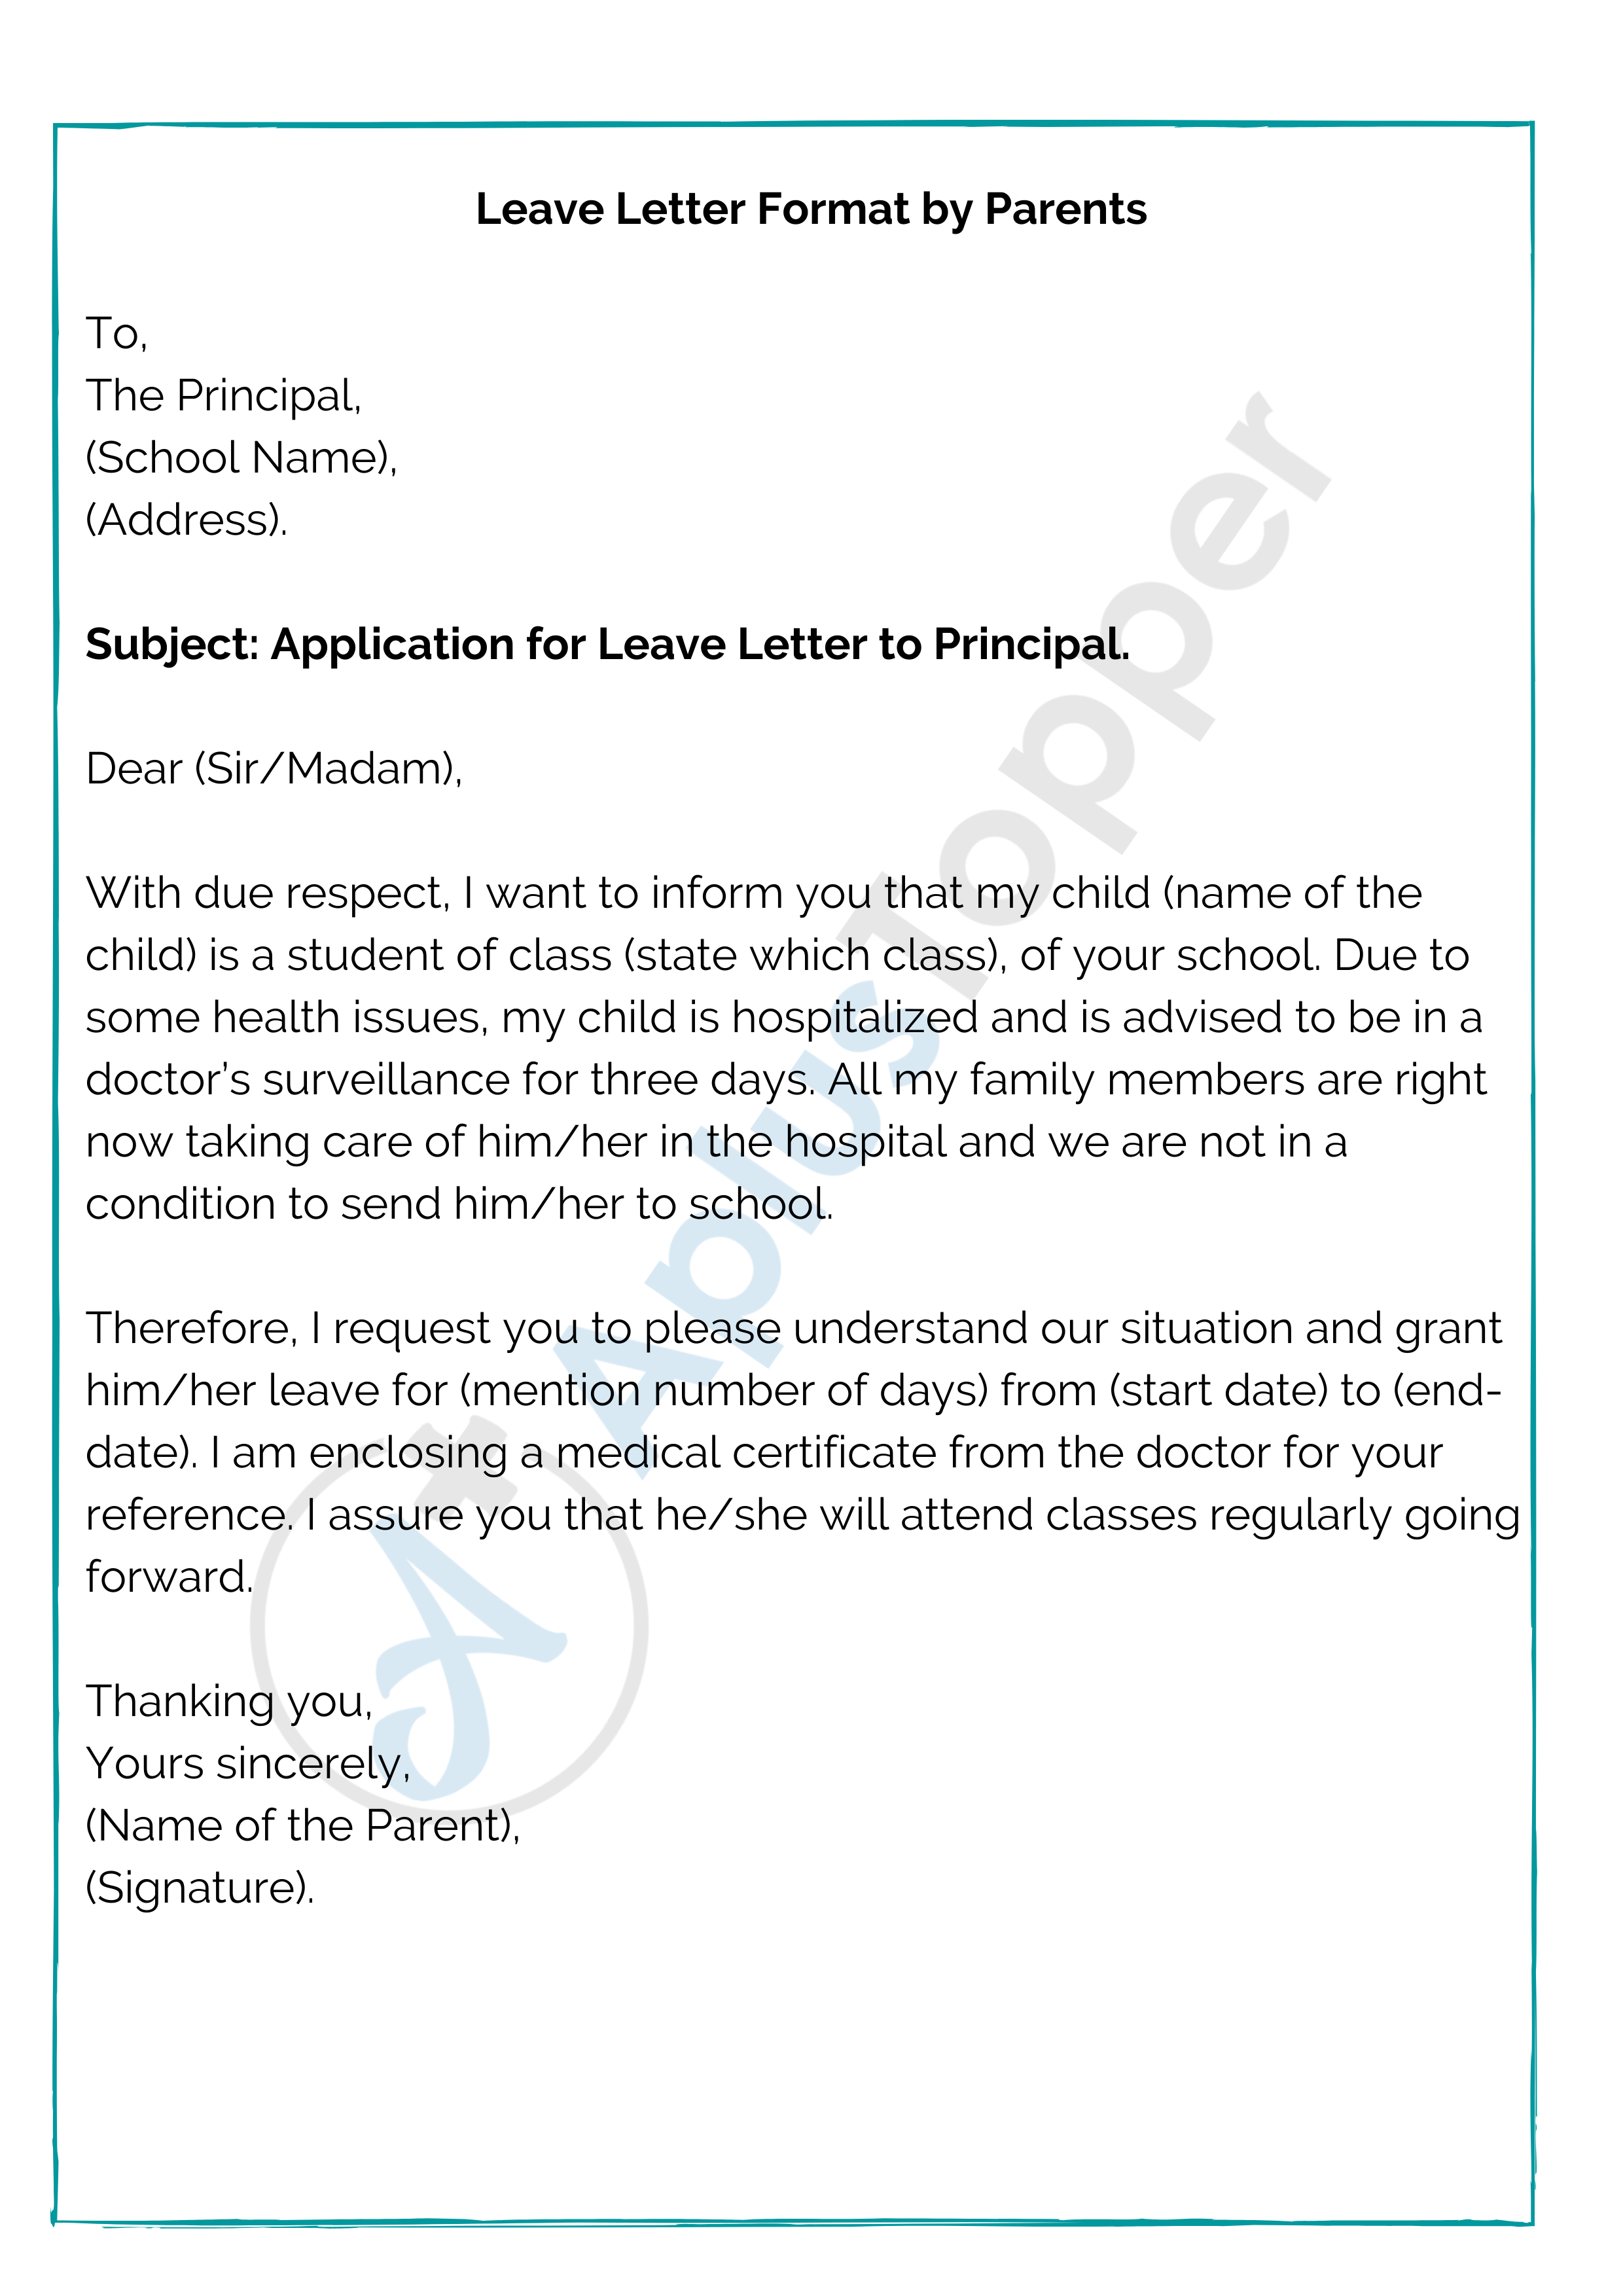 leave application letter to